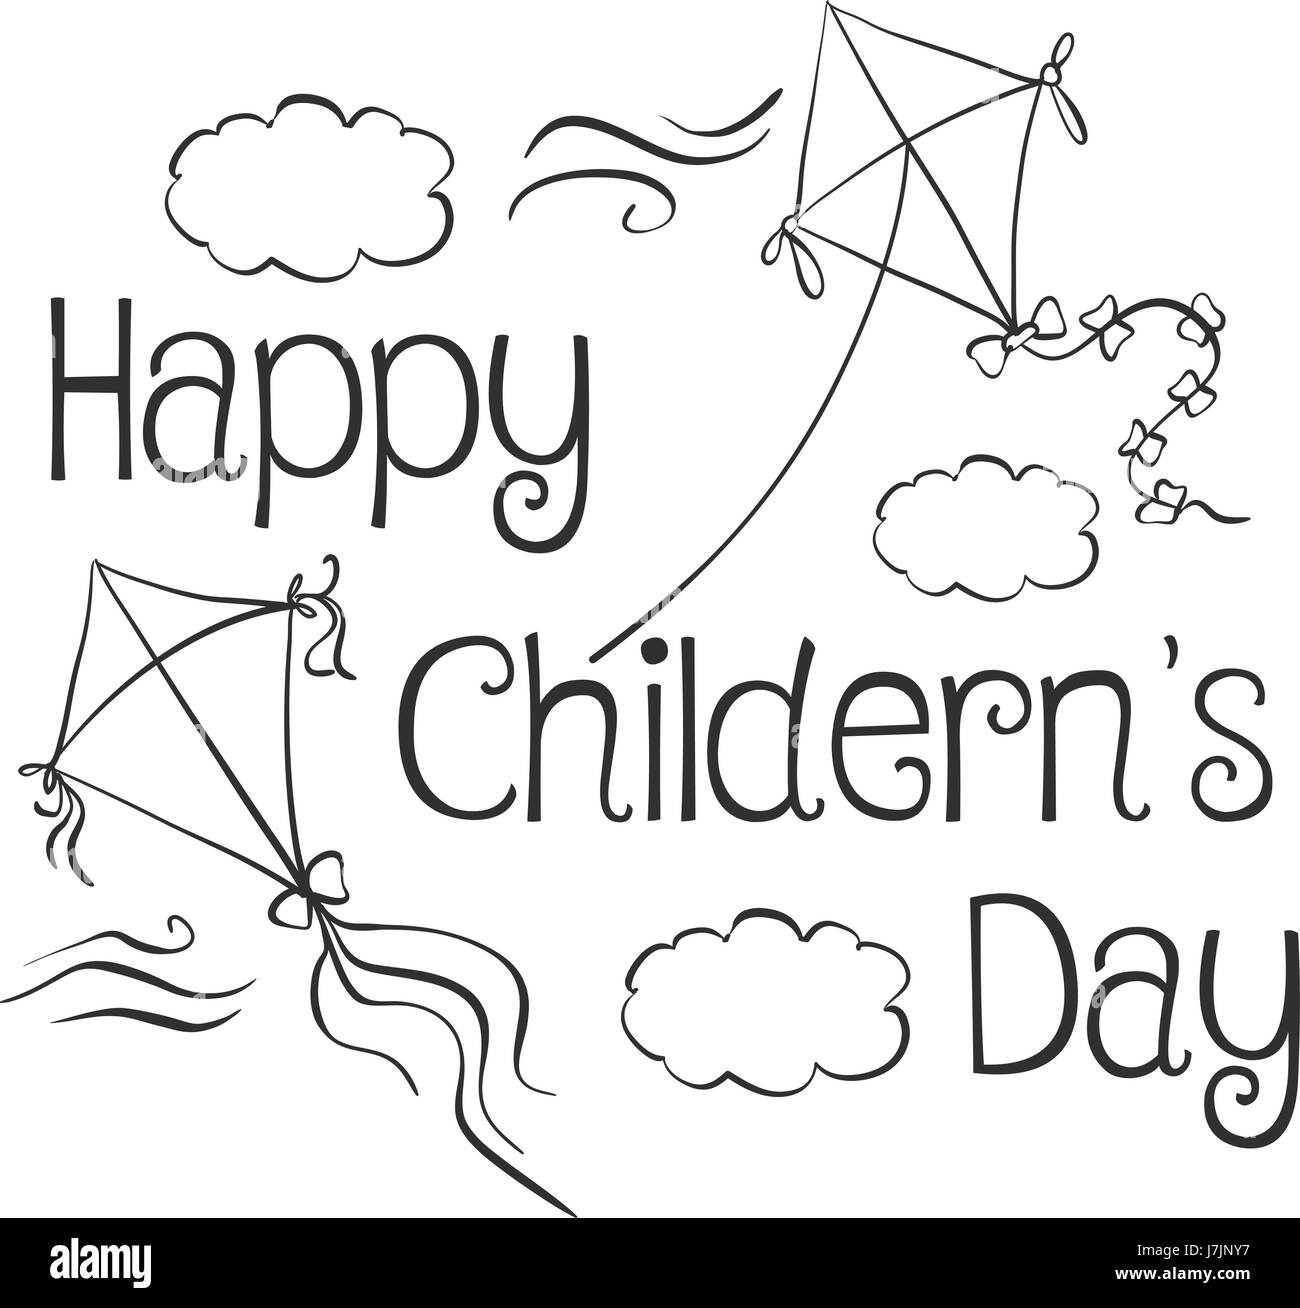 Happy children day poster day design template | PosterMyWall